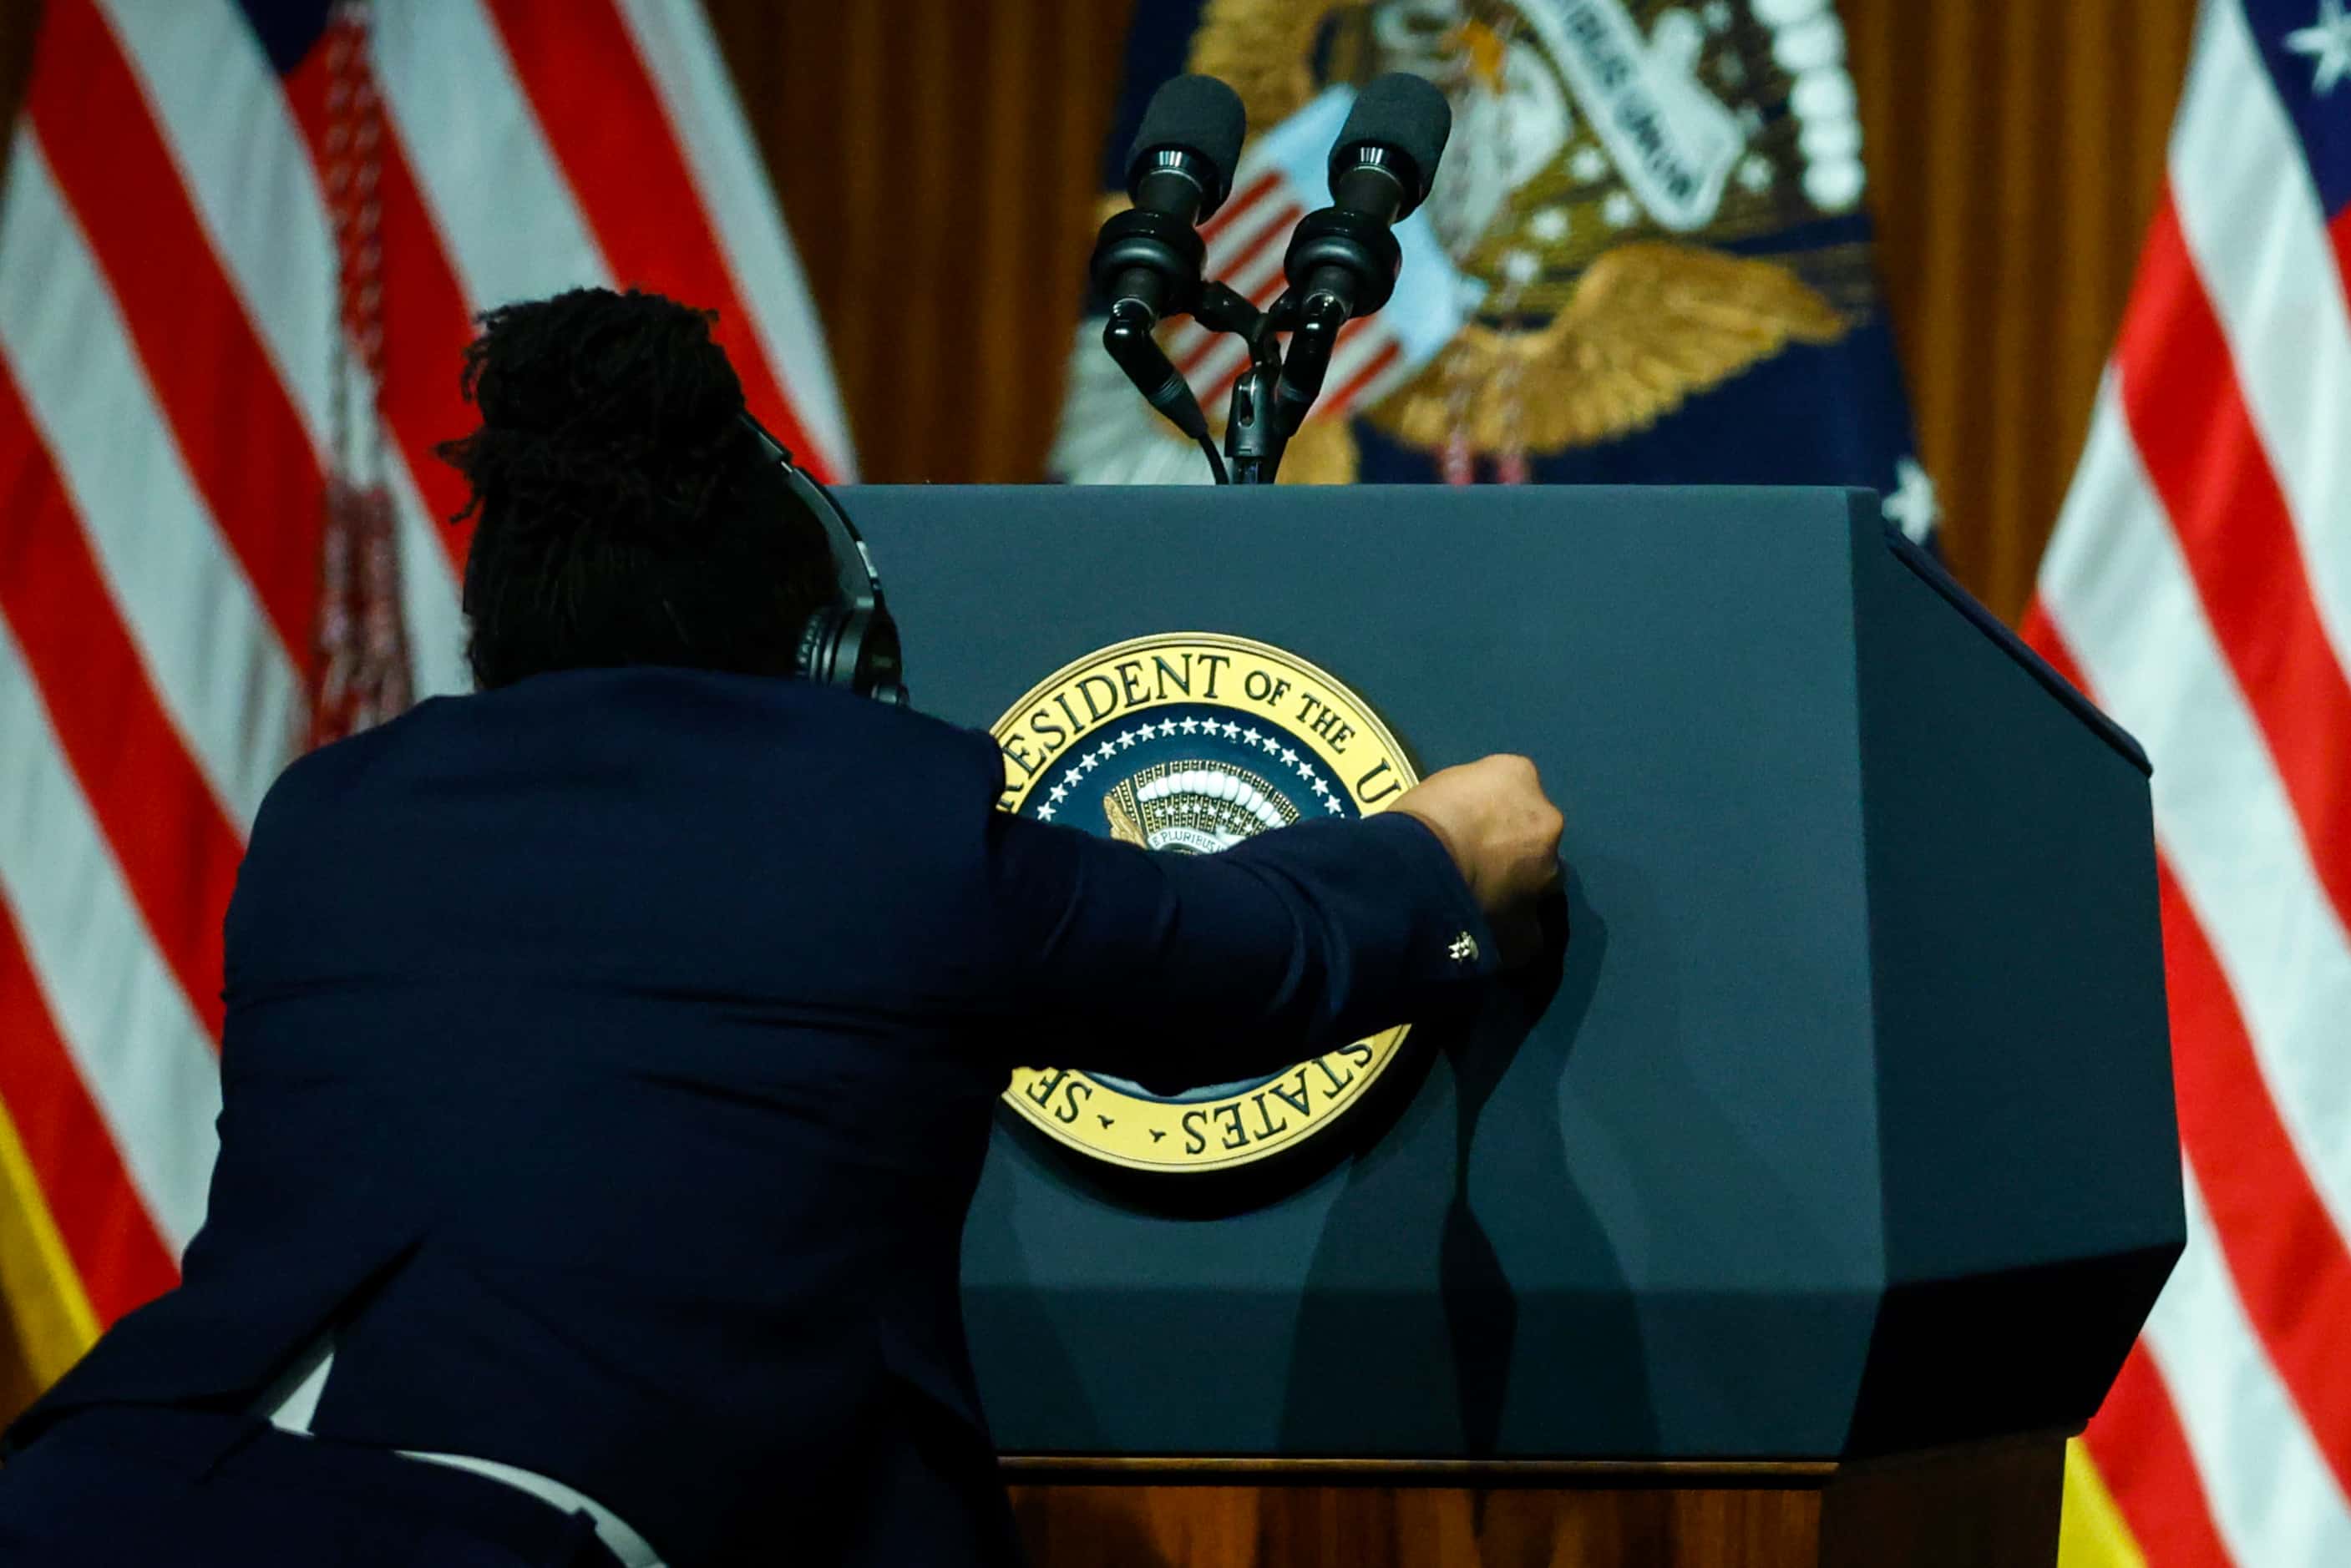 A staffer places the presidential seal on the podium before President Joe Biden delivers the...